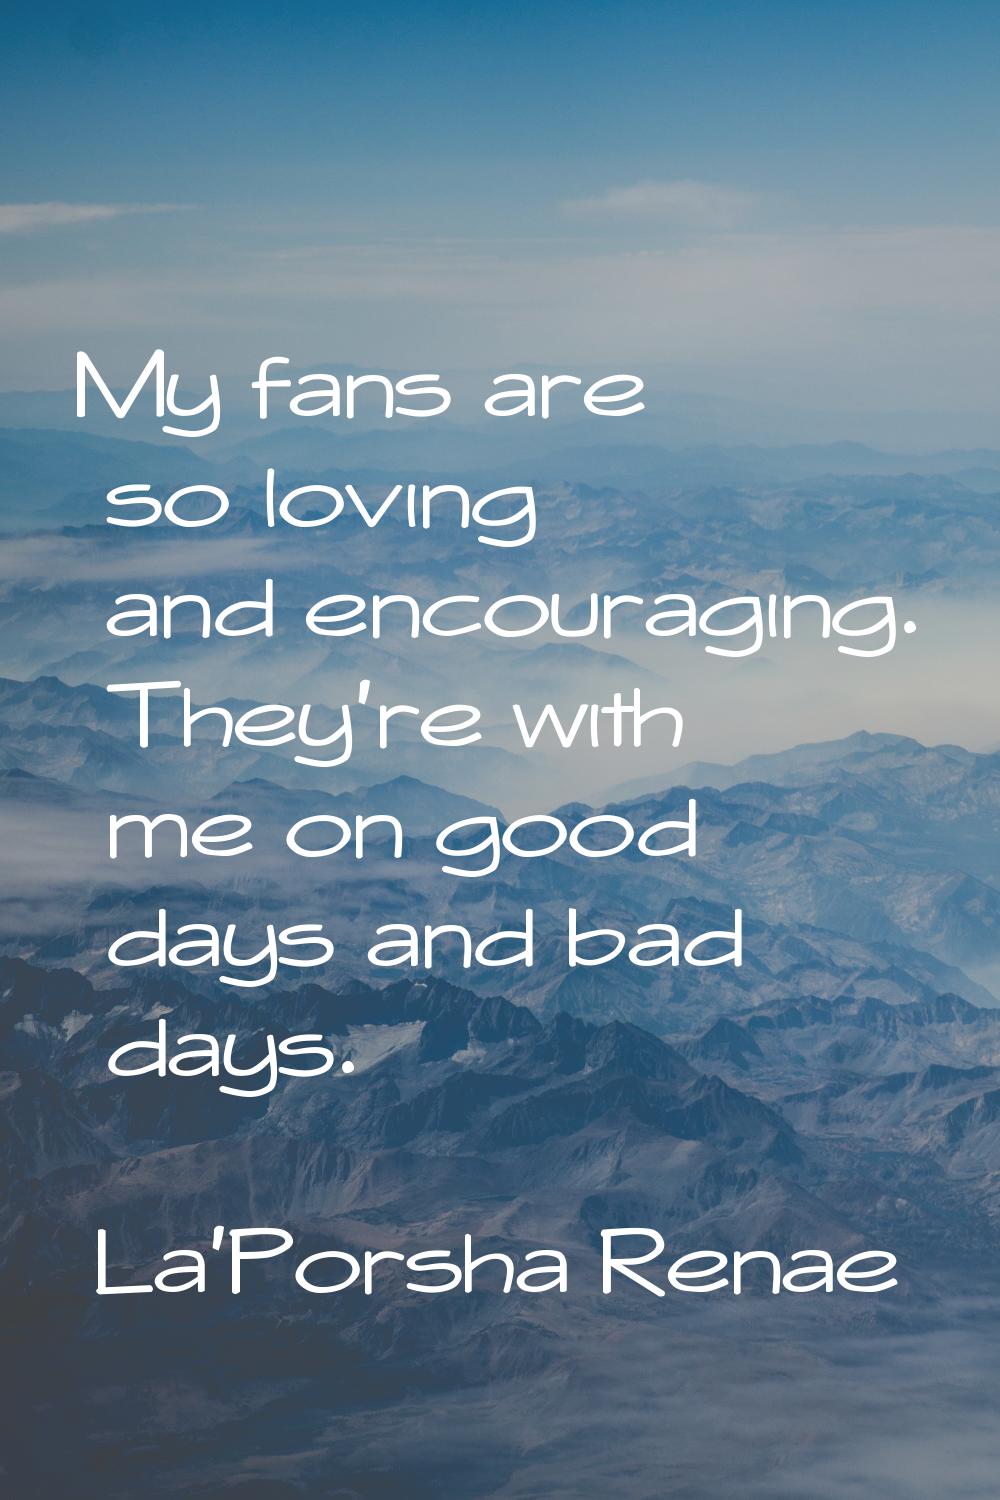 My fans are so loving and encouraging. They're with me on good days and bad days.